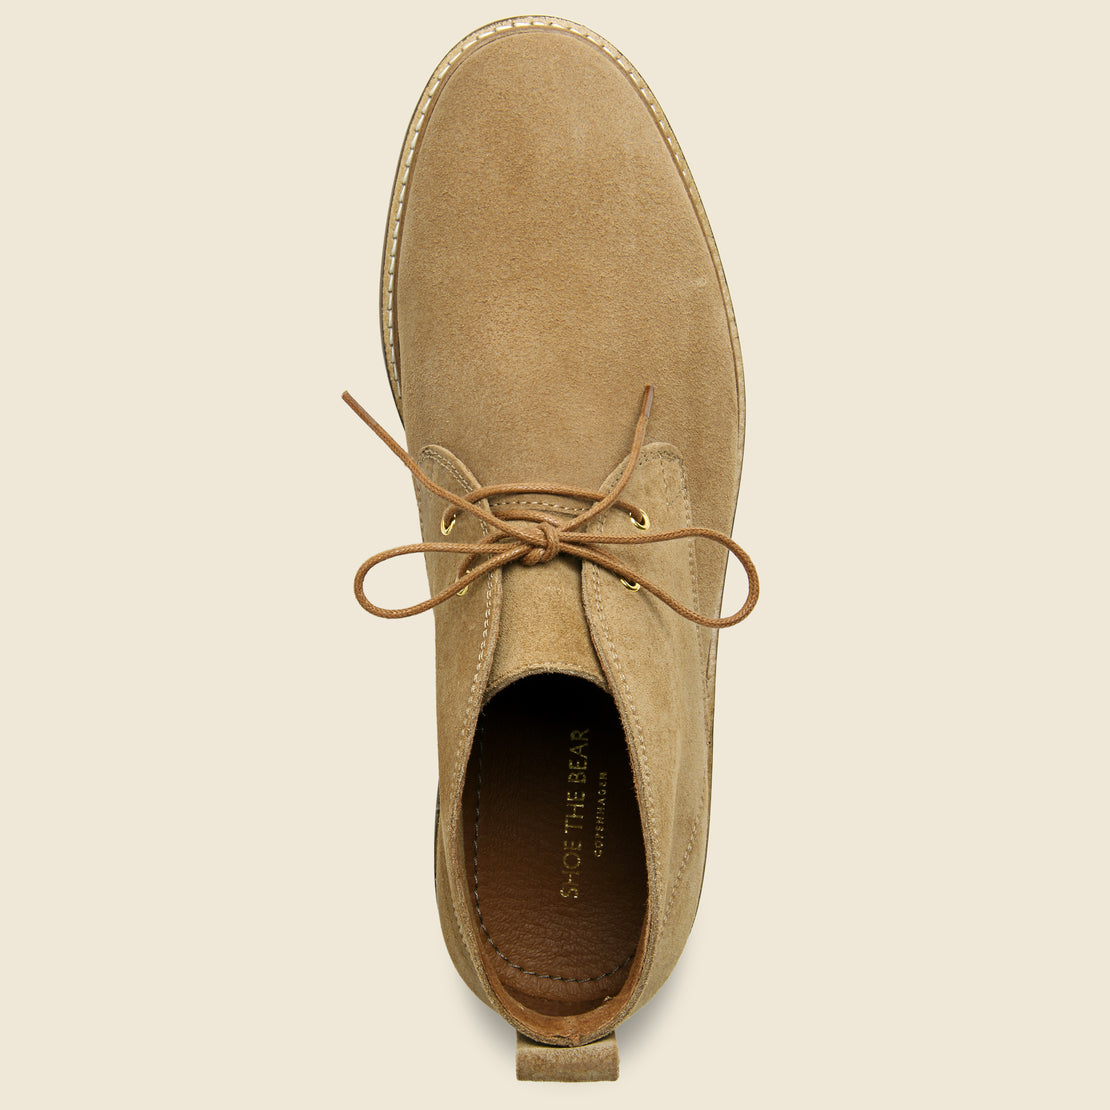 Caleb Suede Chukka - Camel - Shoe the Bear - STAG Provisions - Shoes - Boots / Chukkas